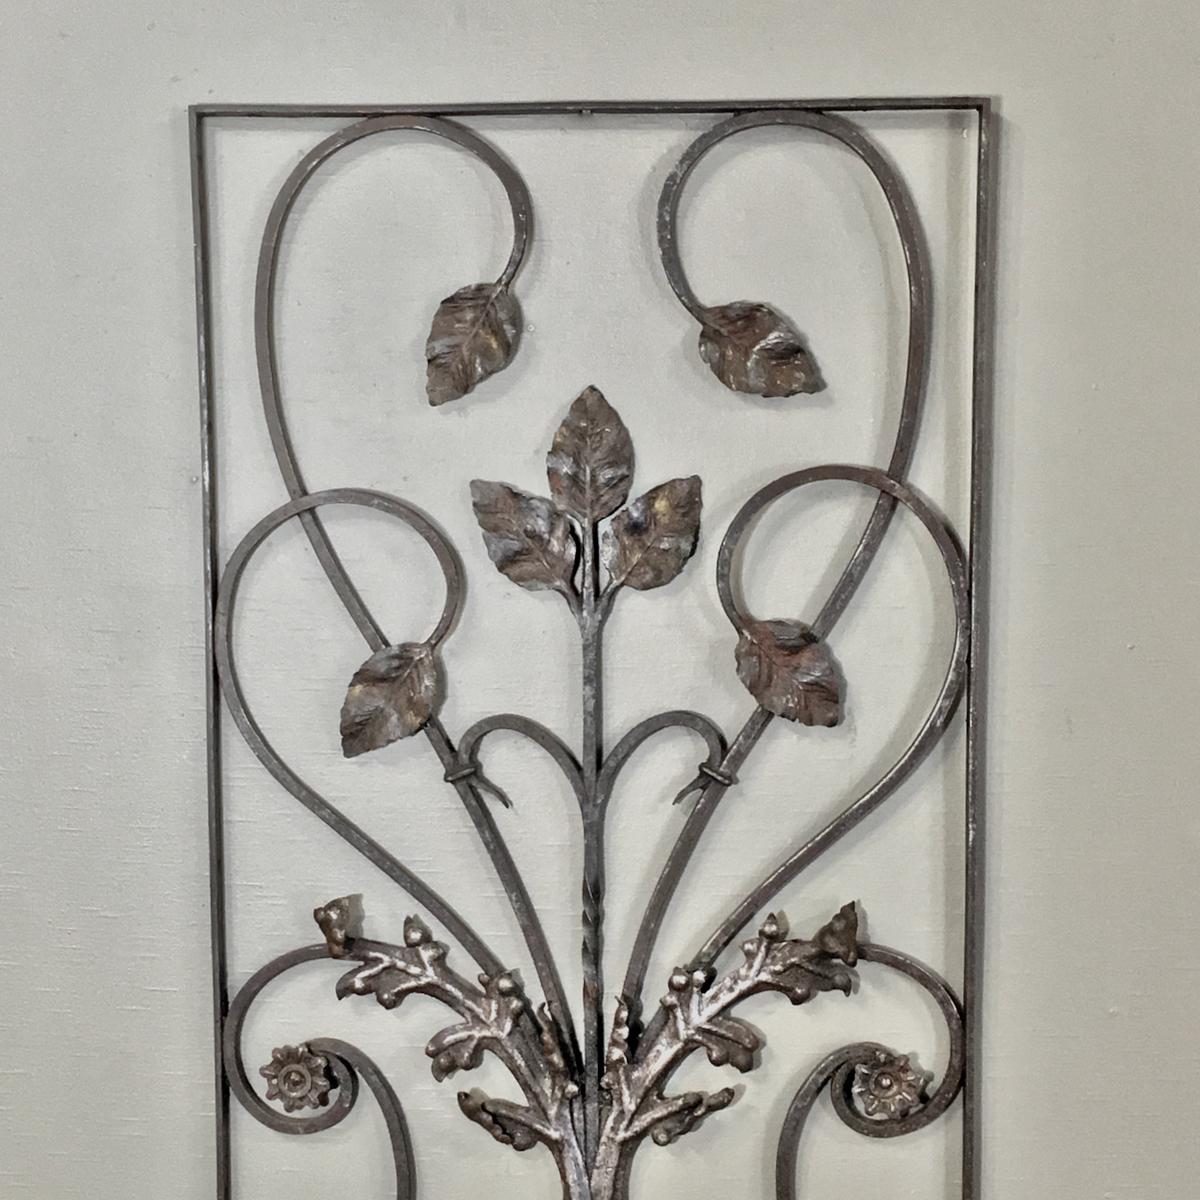 Charming 19th century French wrought iron panel was hand-forged during the early Art Nouveau period. Great antique iron piece to use outside in the garden and also indoors as a decorative accent,
circa 1890s
Measures: 38 H x 23 W.